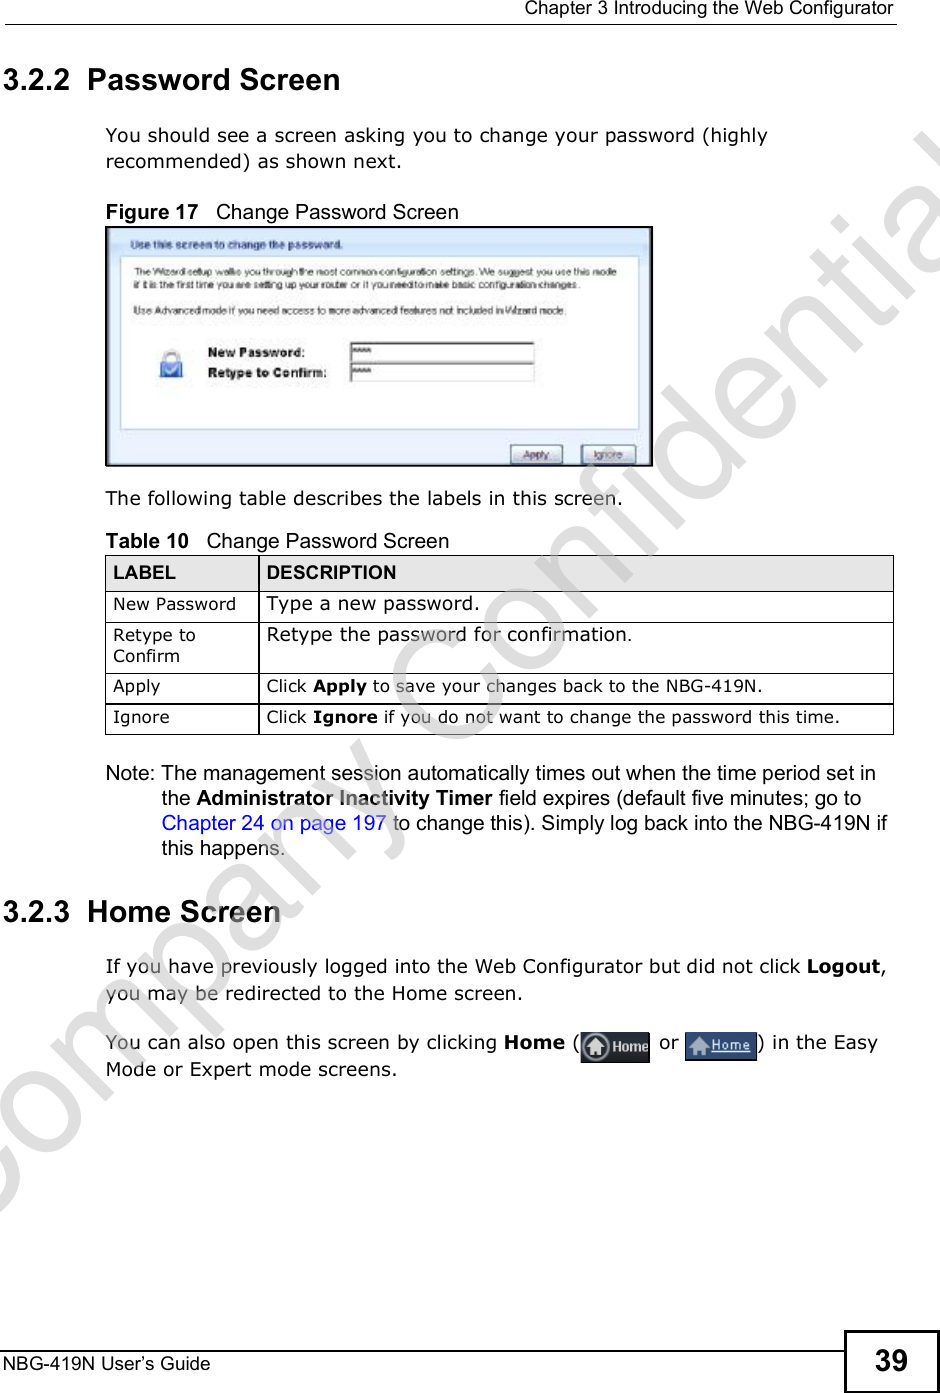  Chapter 3Introducing the Web ConfiguratorNBG-419N User s Guide 393.2.2  Password ScreenYou should see a screen asking you to change your password (highly recommended) as shown next. Figure 17   Change Password ScreenThe following table describes the labels in this screen.Note: The management session automatically times out when the time period set in the Administrator Inactivity Timer field expires (default five minutes; go to Chapter 24 on page 197 to change this). Simply log back into the NBG-419N if this happens.3.2.3  Home ScreenIf you have previously logged into the Web Configurator but did not click Logout, you may be redirected to the Home screen.You can also open this screen by clicking Home ( or ) in the Easy Mode or Expert mode screens.Table 10   Change Password ScreenLABEL DESCRIPTIONNew Password Type a new password. Retype to ConfirmRetype the password for confirmation.Apply Click Apply to save your changes back to the NBG-419N.Ignore Click Ignore if you do not want to change the password this time.Company Confidential